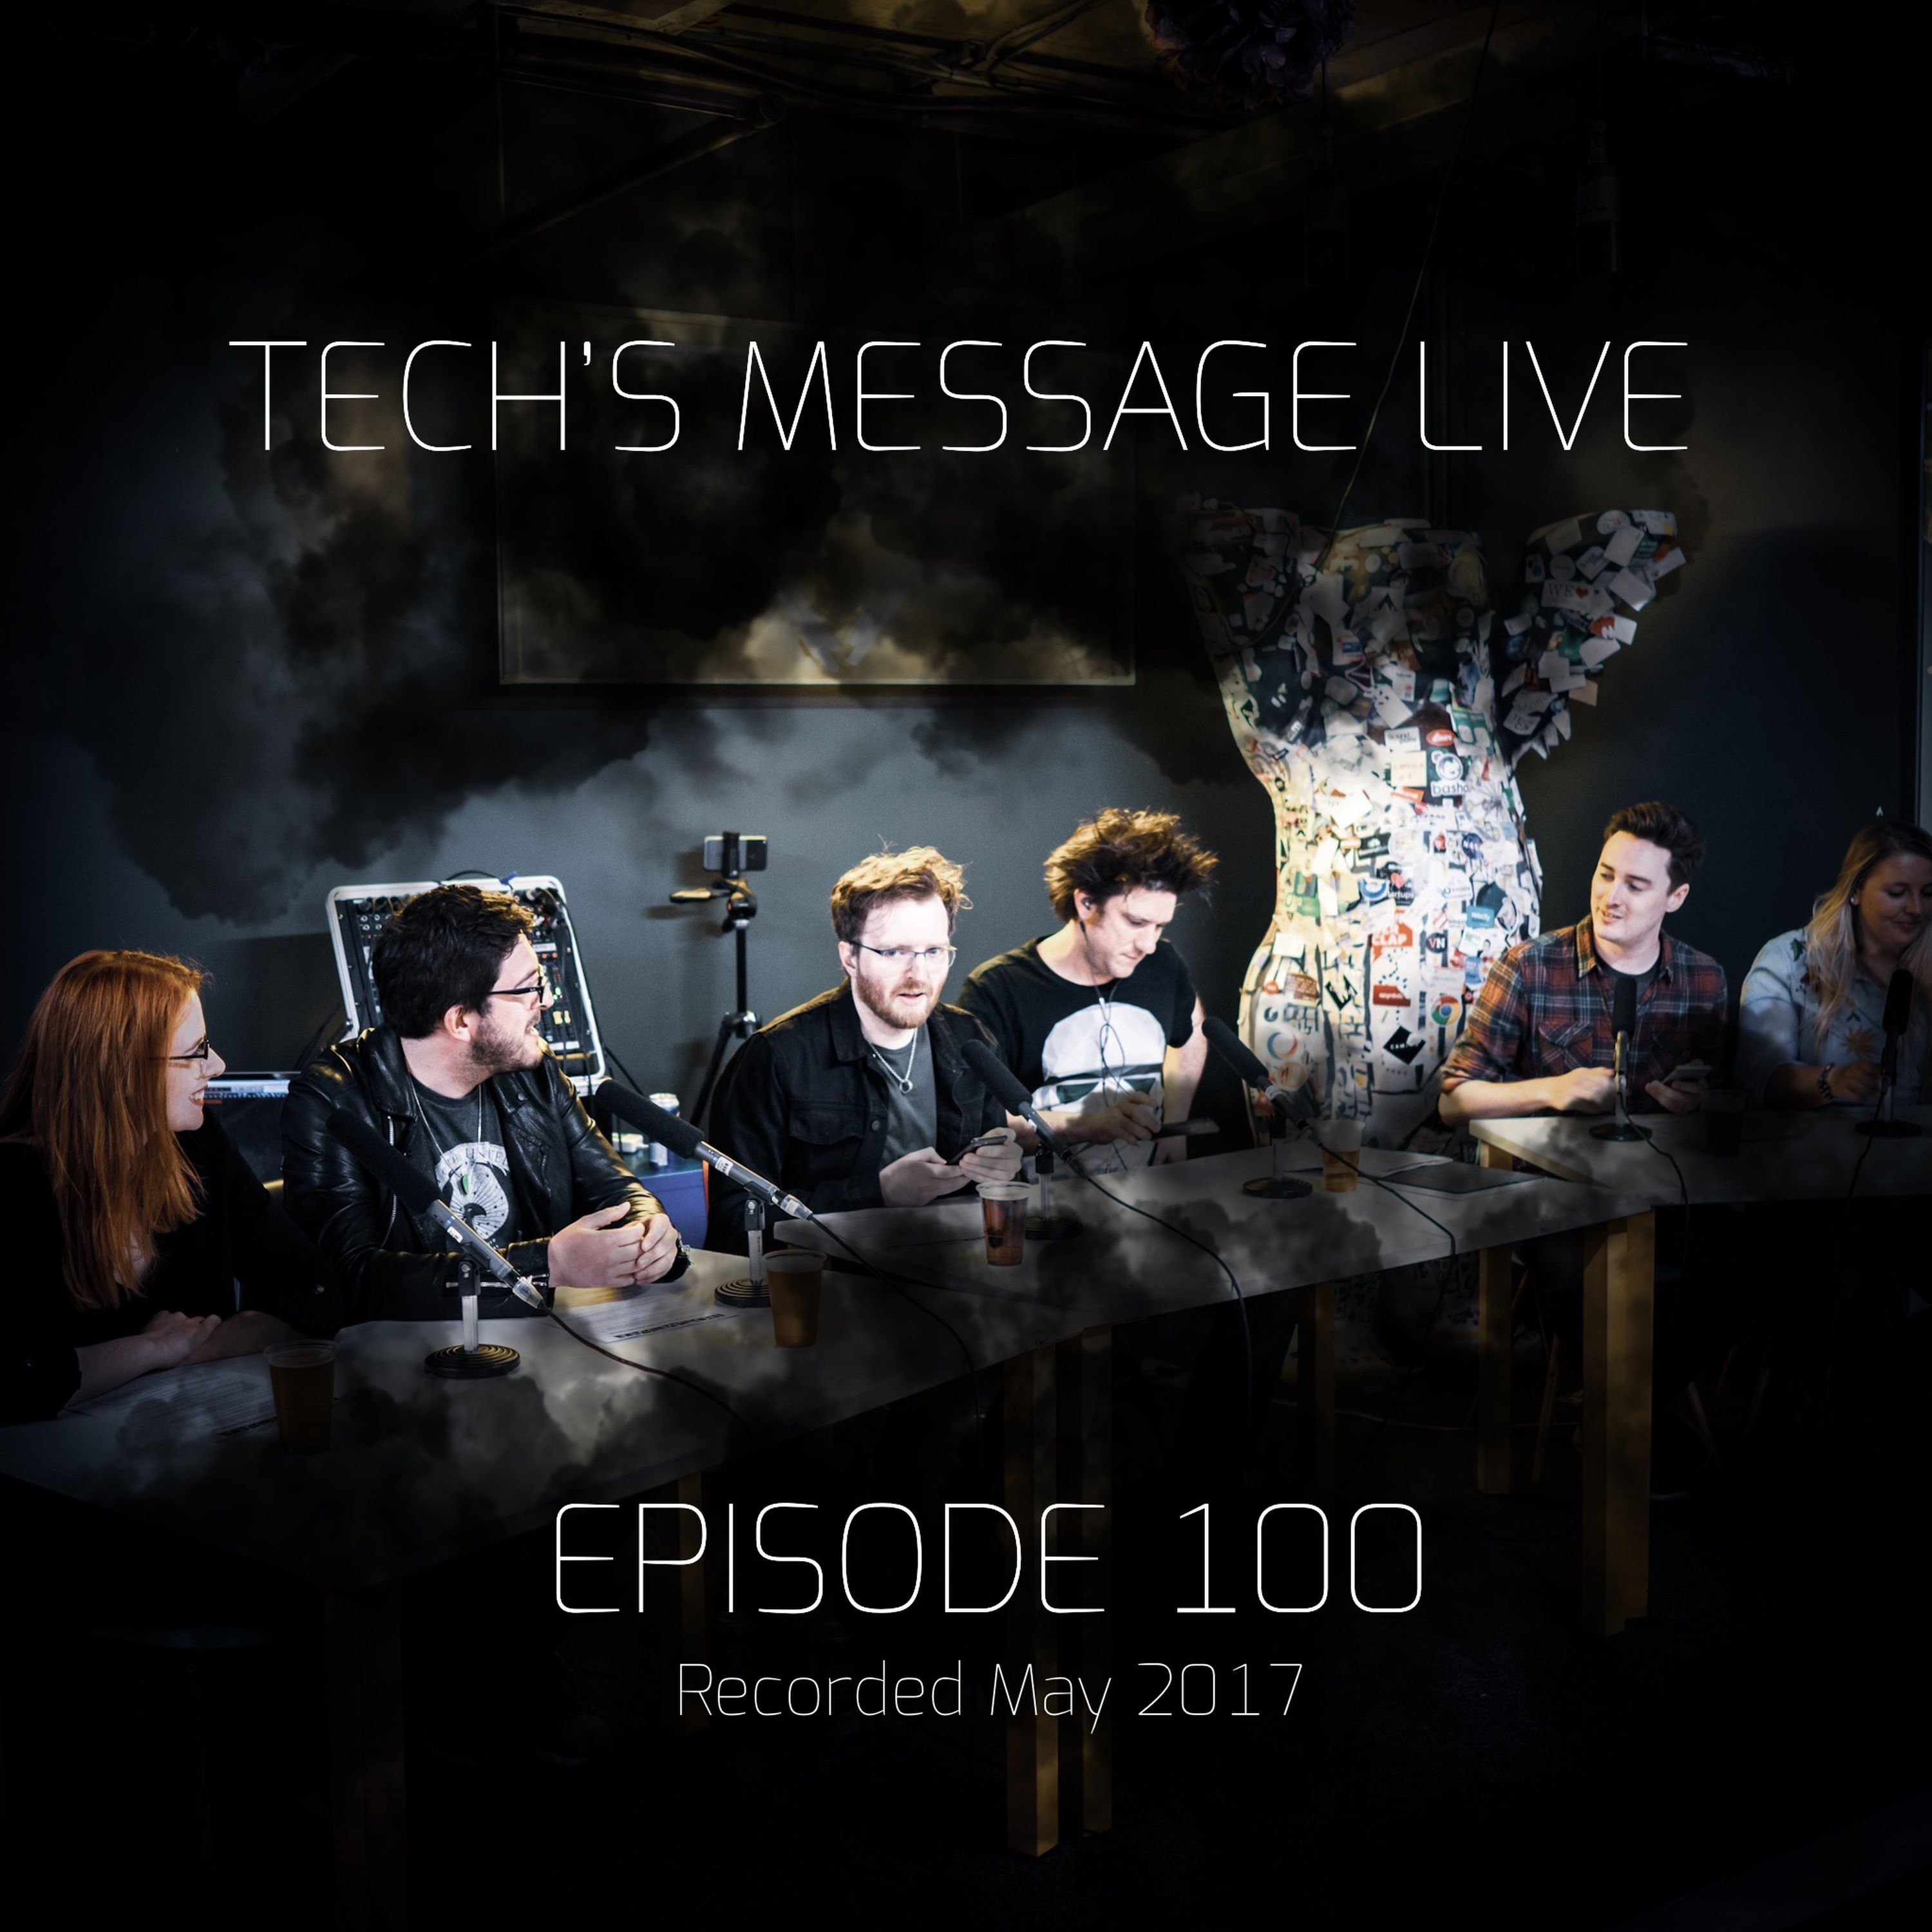 Tech's Message Episode 100 LIVE from London!